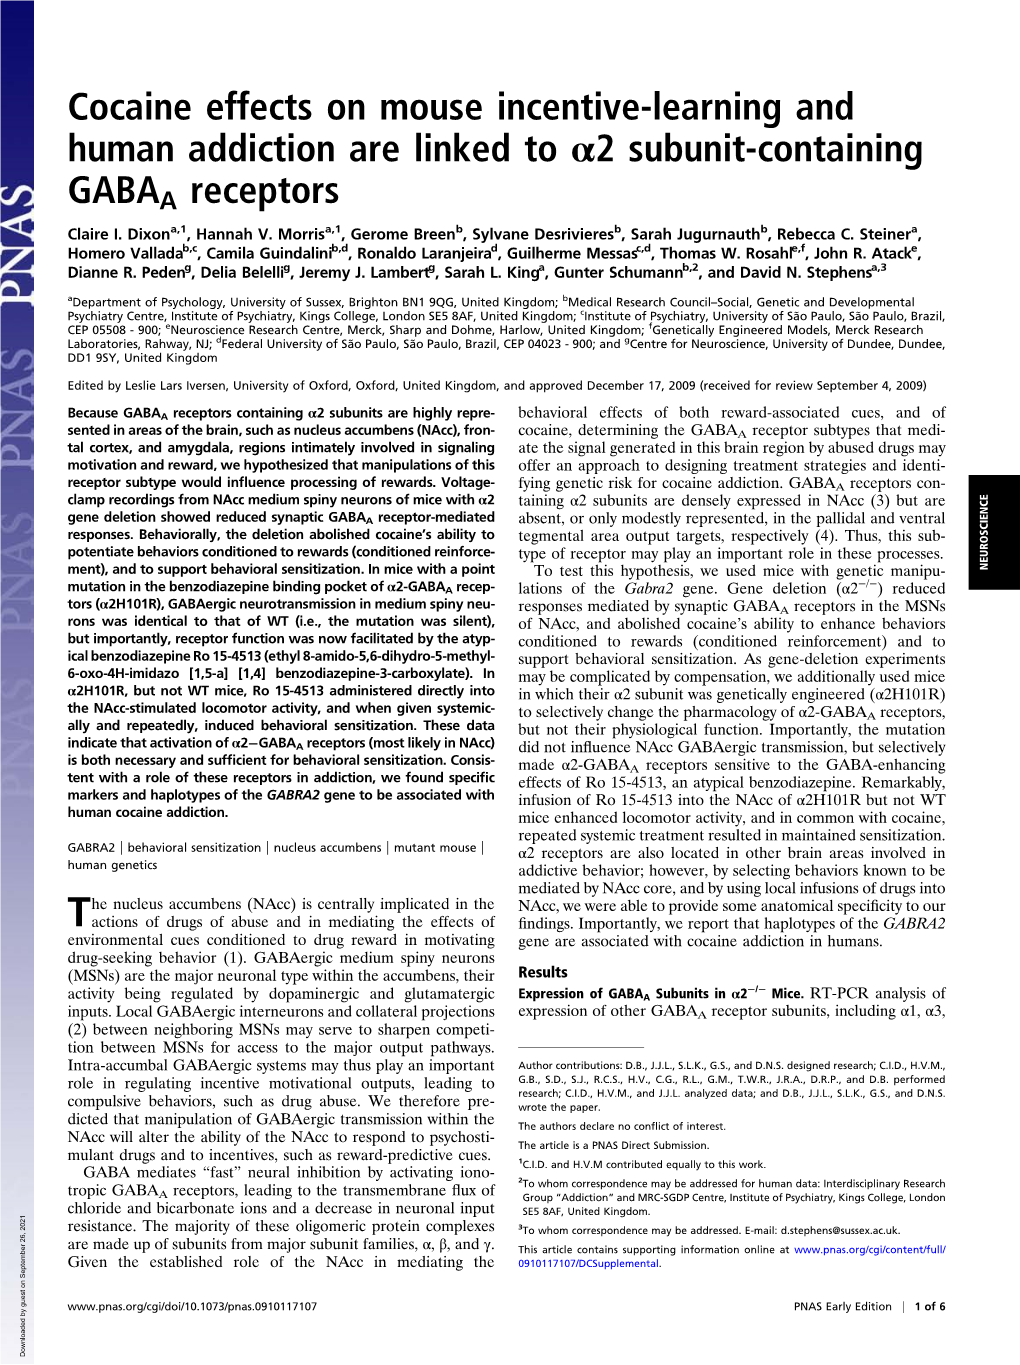 Cocaine Effects on Mouse Incentive-Learning and Human Addiction Are Linked to Α2 Subunit-Containing GABAA Receptors Claire I